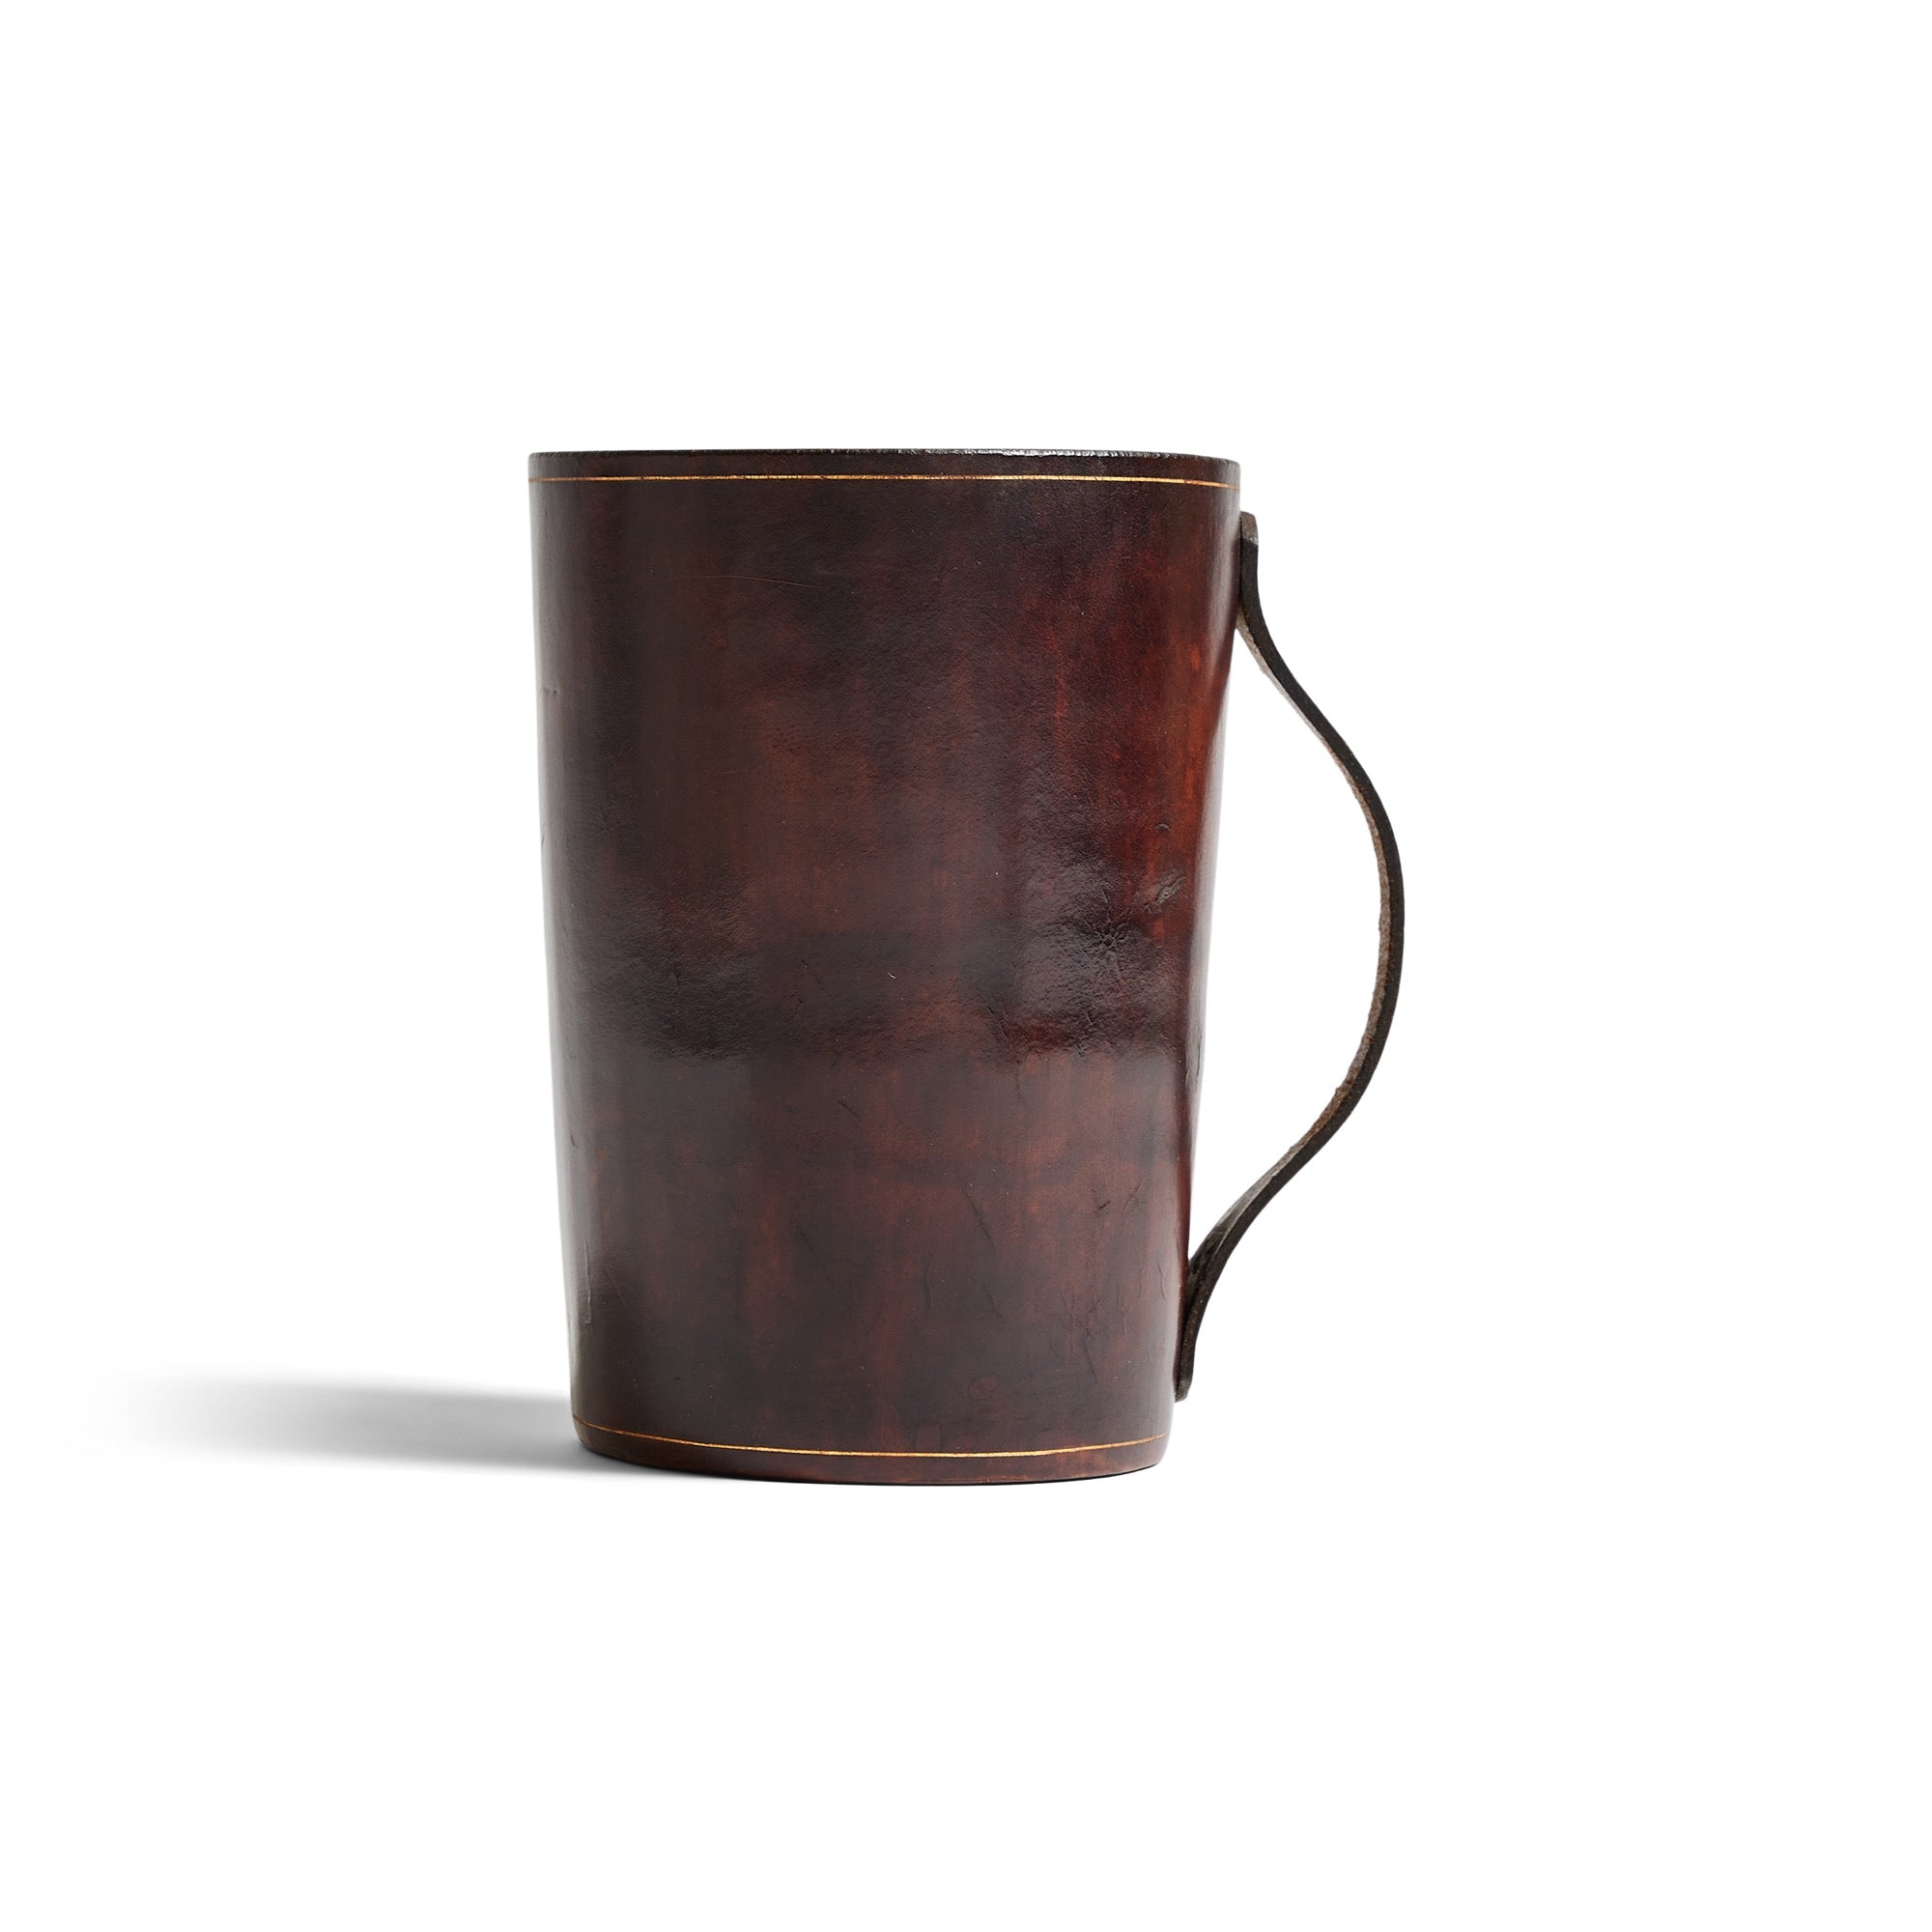 Handled Leather Container for Rosenfeld Imports, 1960s